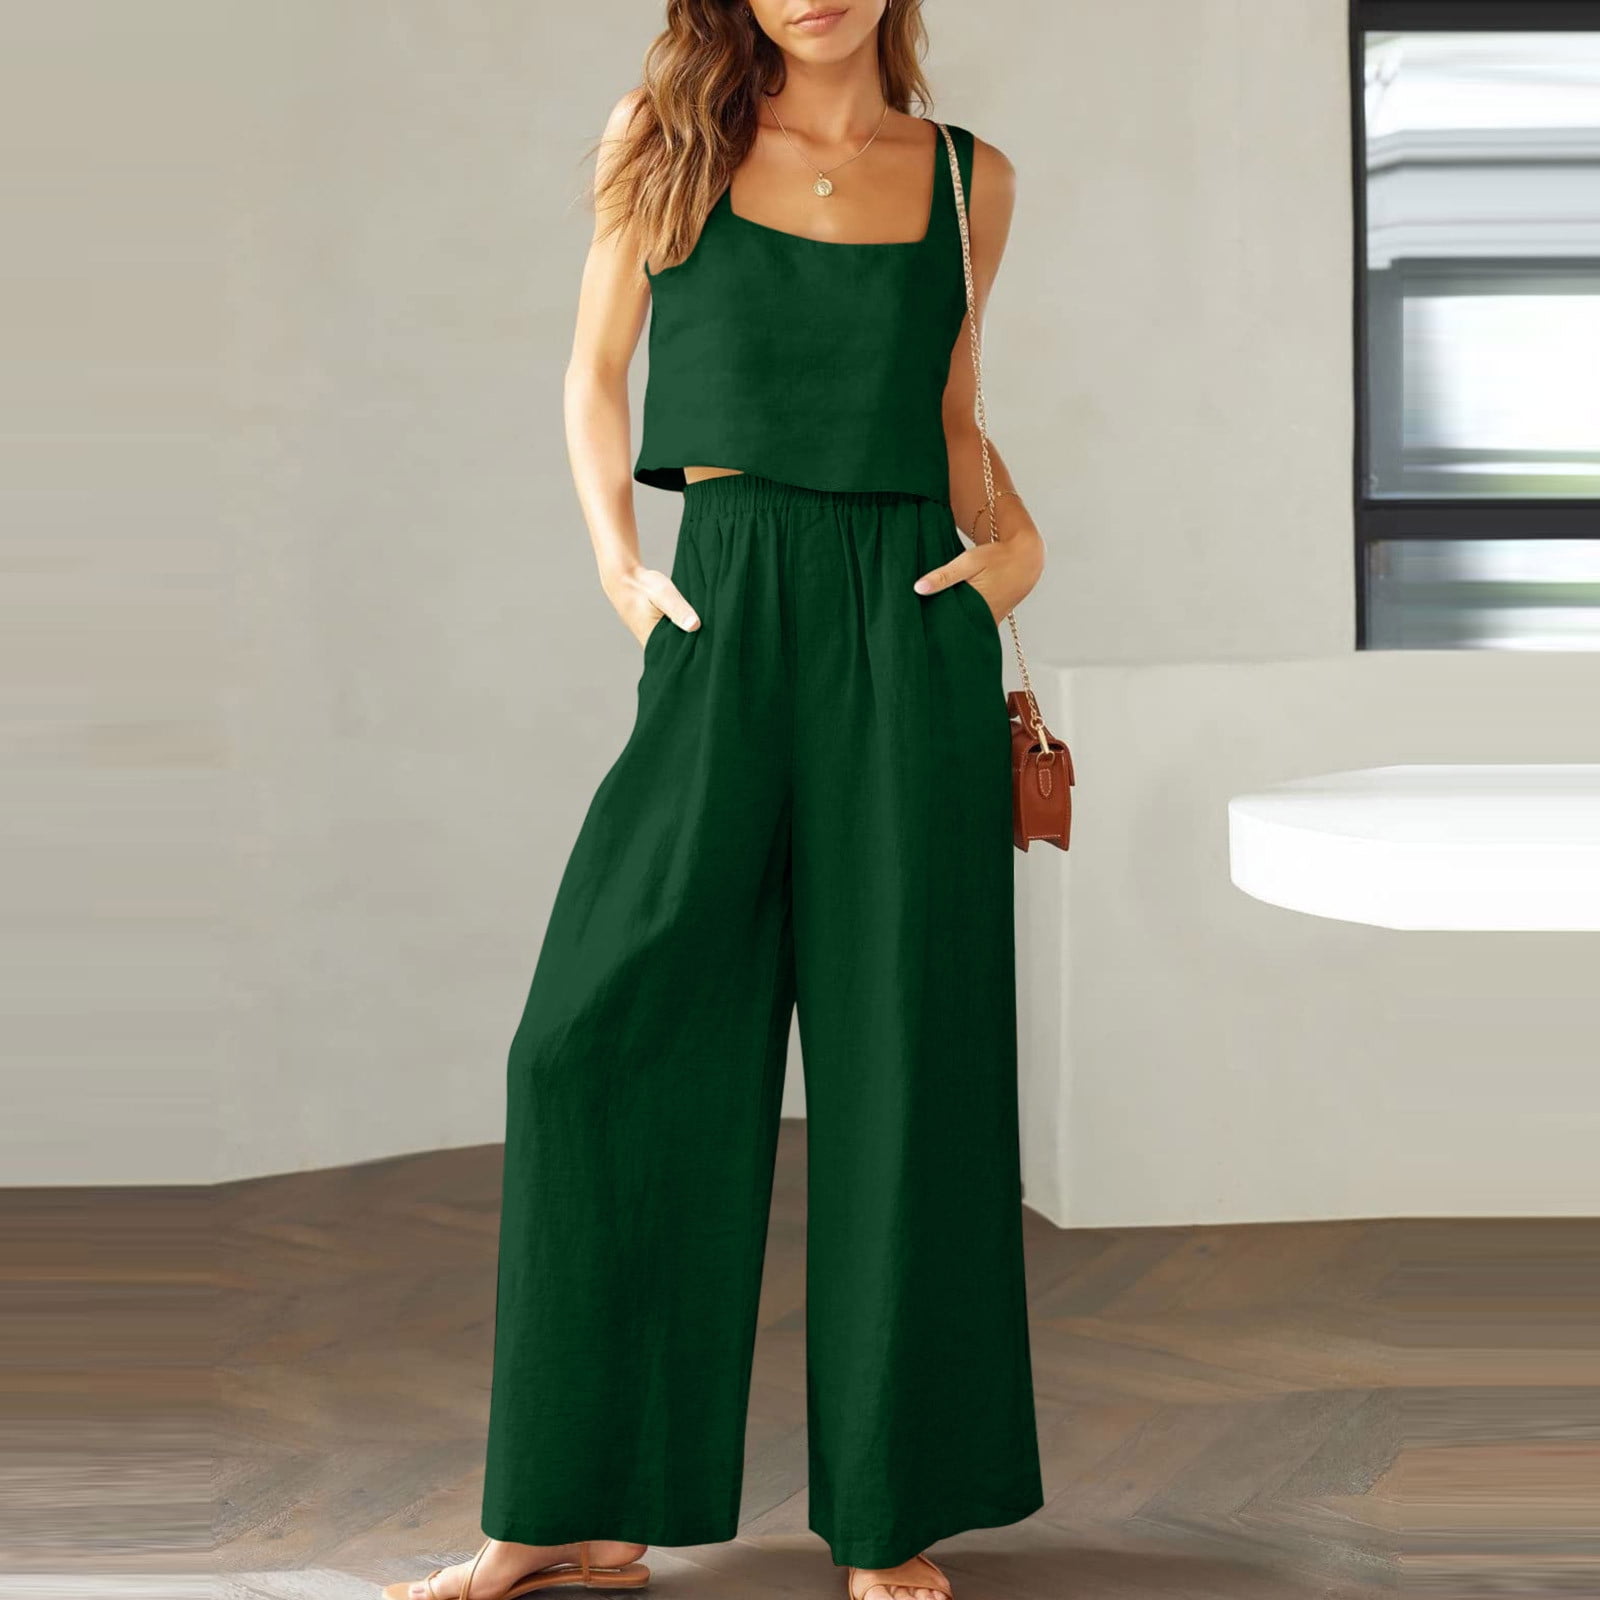 Awesome Styles of Palazzo Pants For Women Should Own! | by Laalzari | Medium